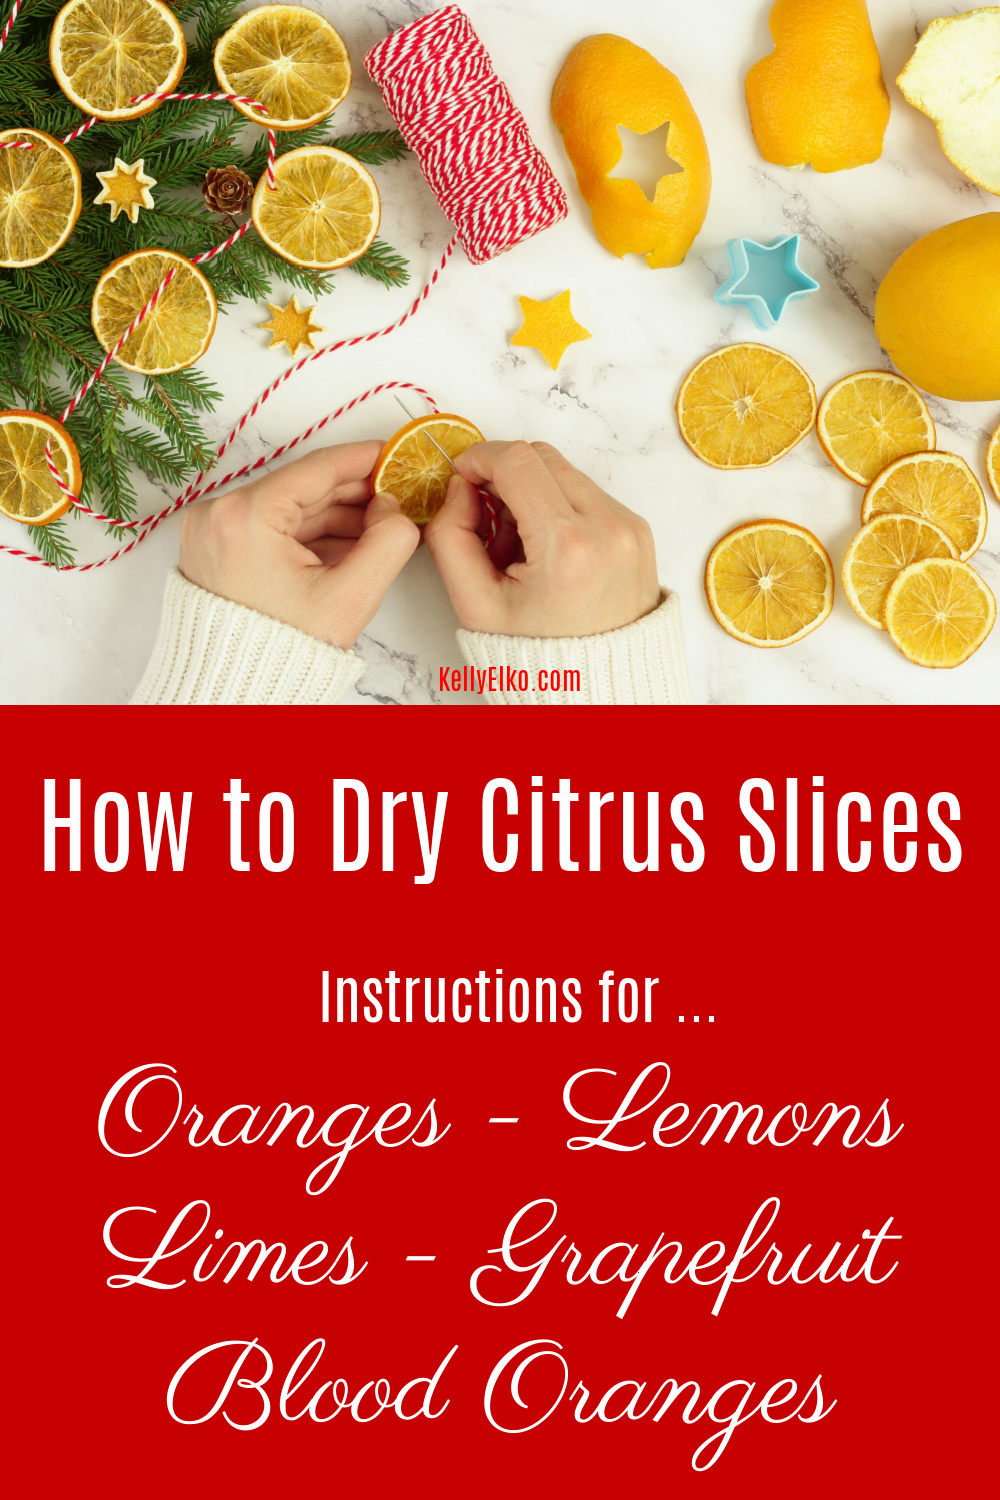 How to Dry Citrus Slices - includes instructions and drying times for oranges, lemons, limes, grapefruit and blood oranges kellyelko.com #citrus #driedcitrus #driedoranges #driedgrapefruit #driedlimes #driedbloodoranges #driedlemons #diycrafts #recipes #christmascrafts #diychristmas #diychristmasdecor #farmhousechristmas #retrochristmas #vintagechristmas